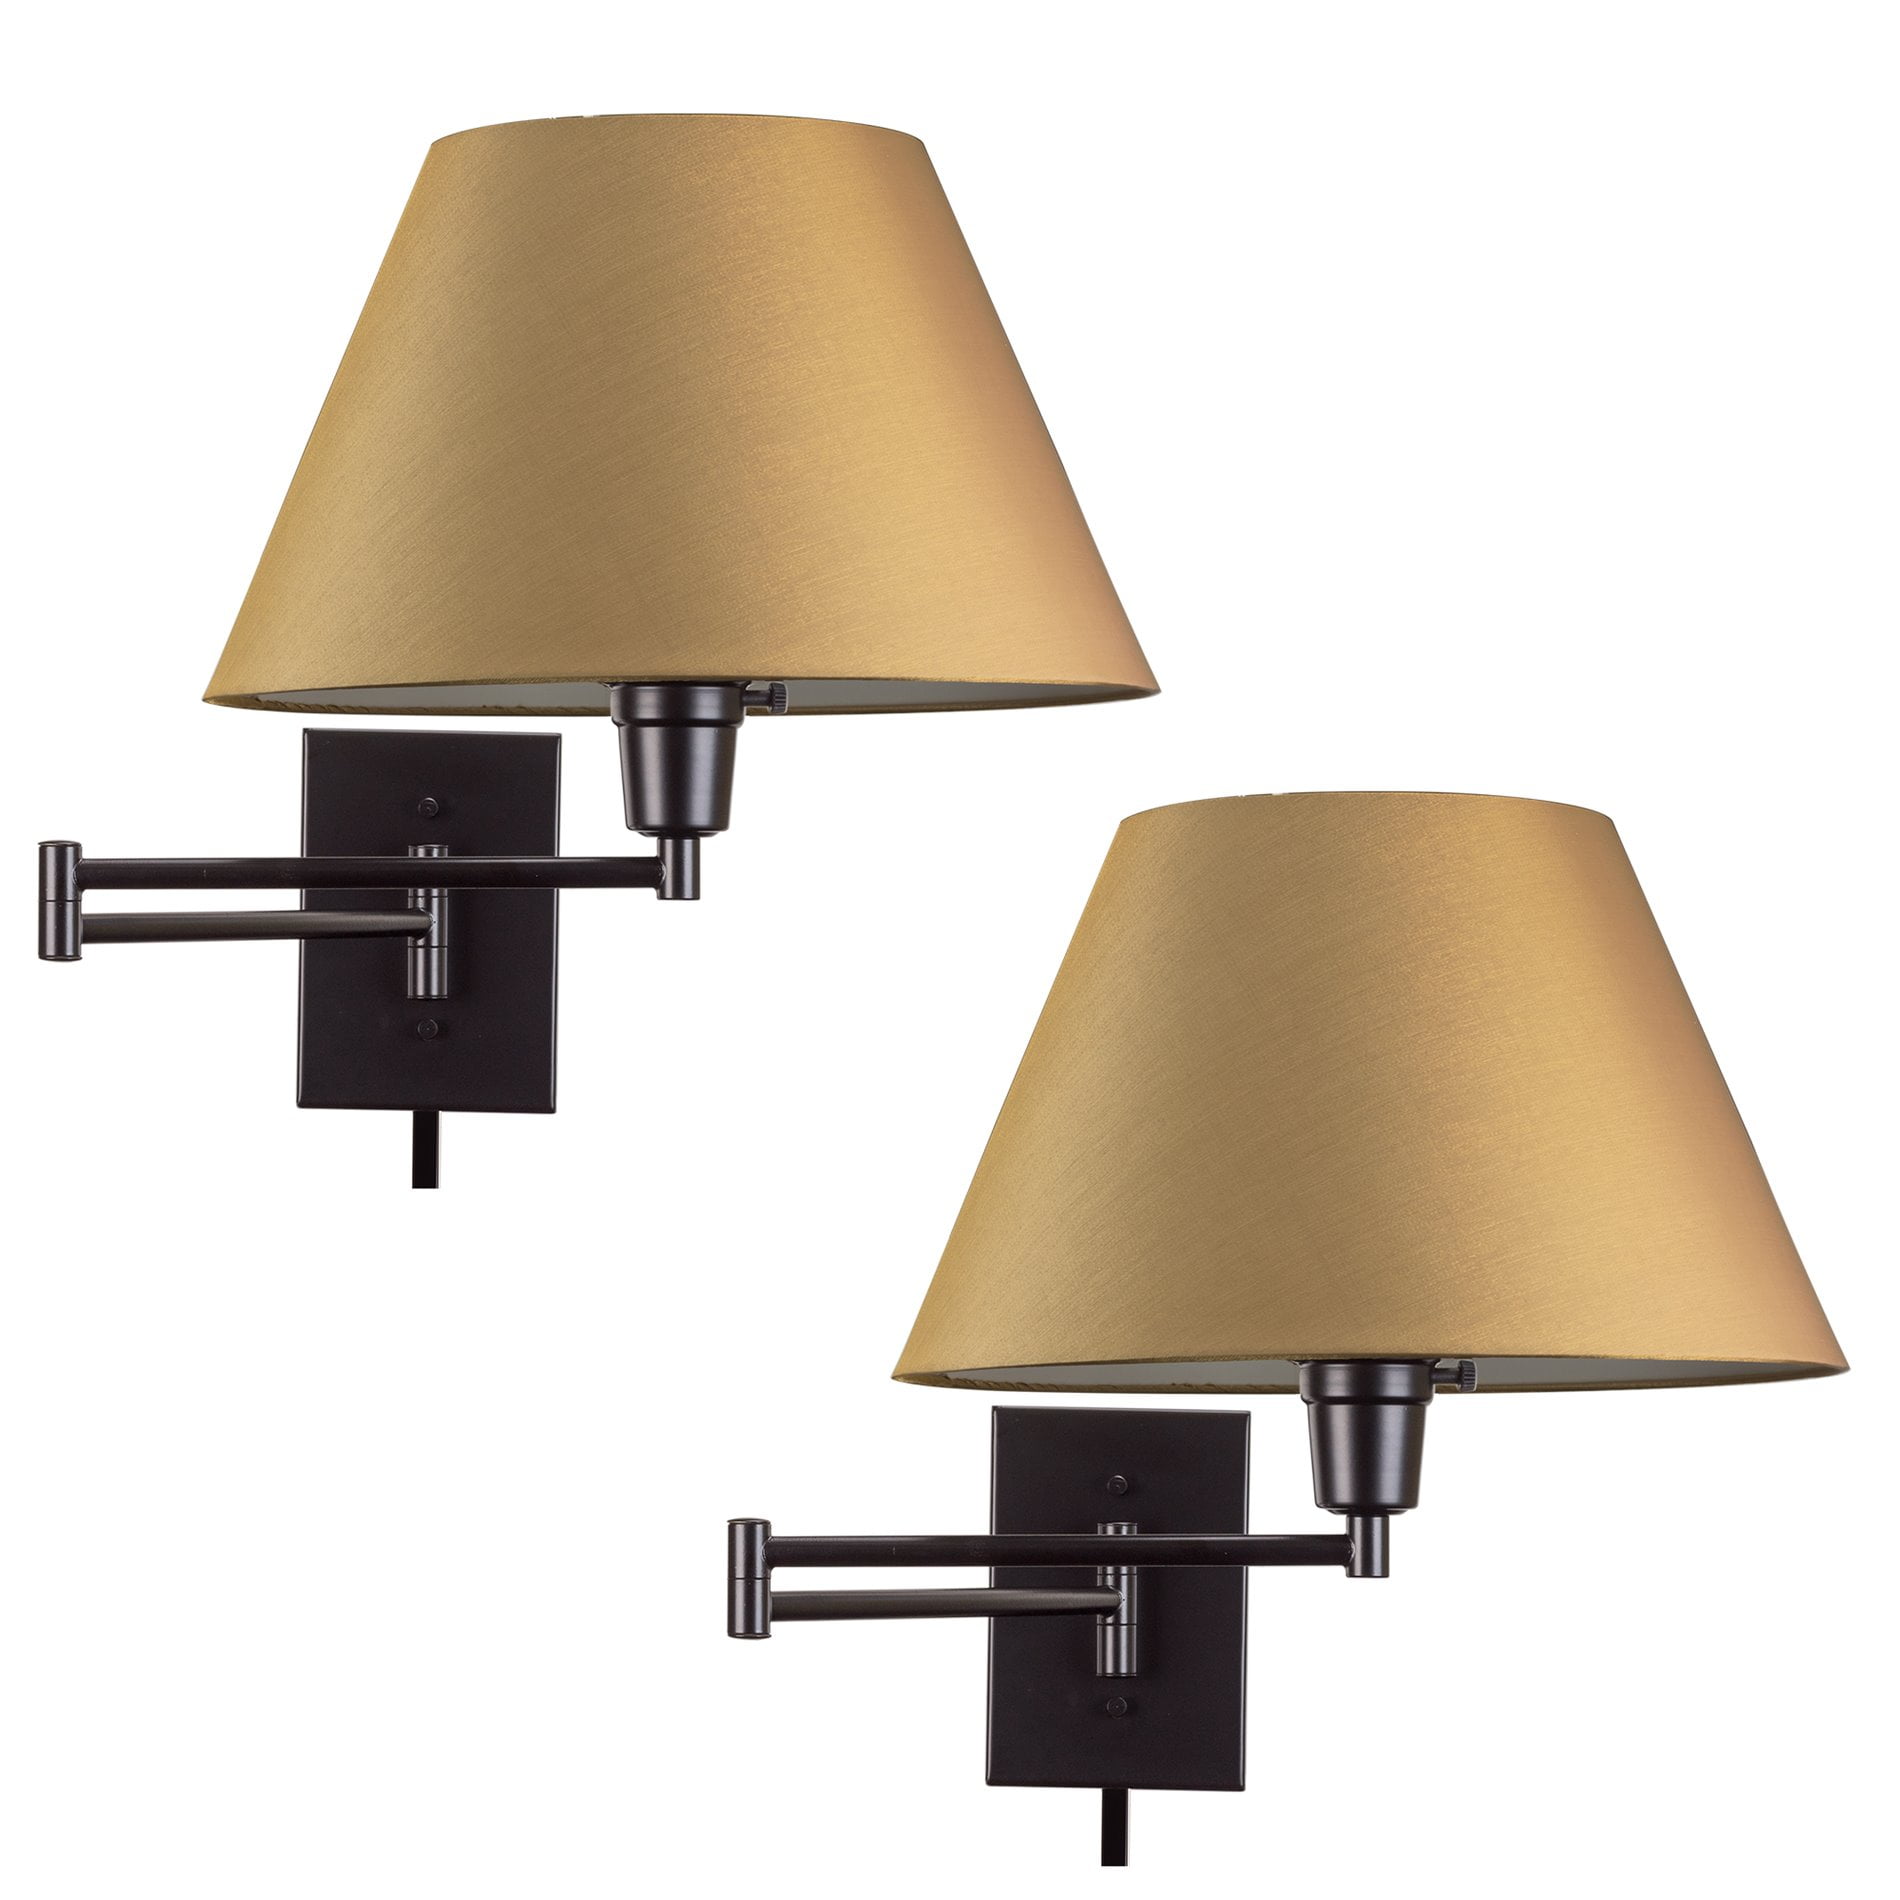 Oil Rubbed Bronze Finish House of Troy Lighting C175-OB Cambridge 1-Light Adjustable Swing-Arm Wall Lamp